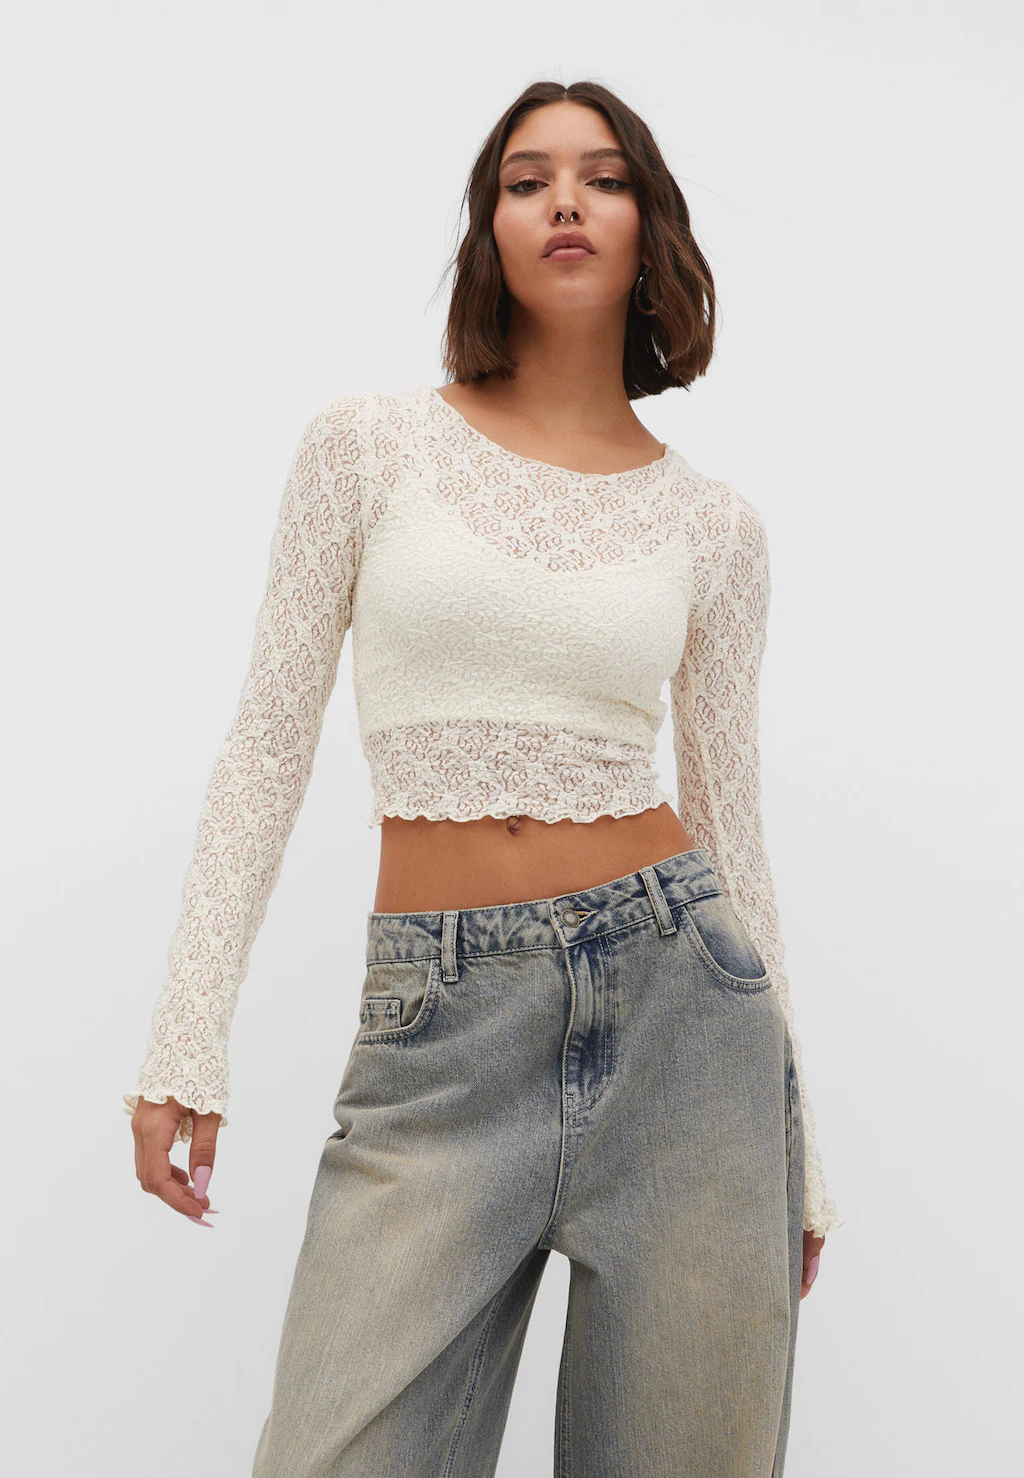 White Lace Crop Top With Ruffles Stradivarius in white  White lace crop  top, White ruffle blouse, Lace crop tops